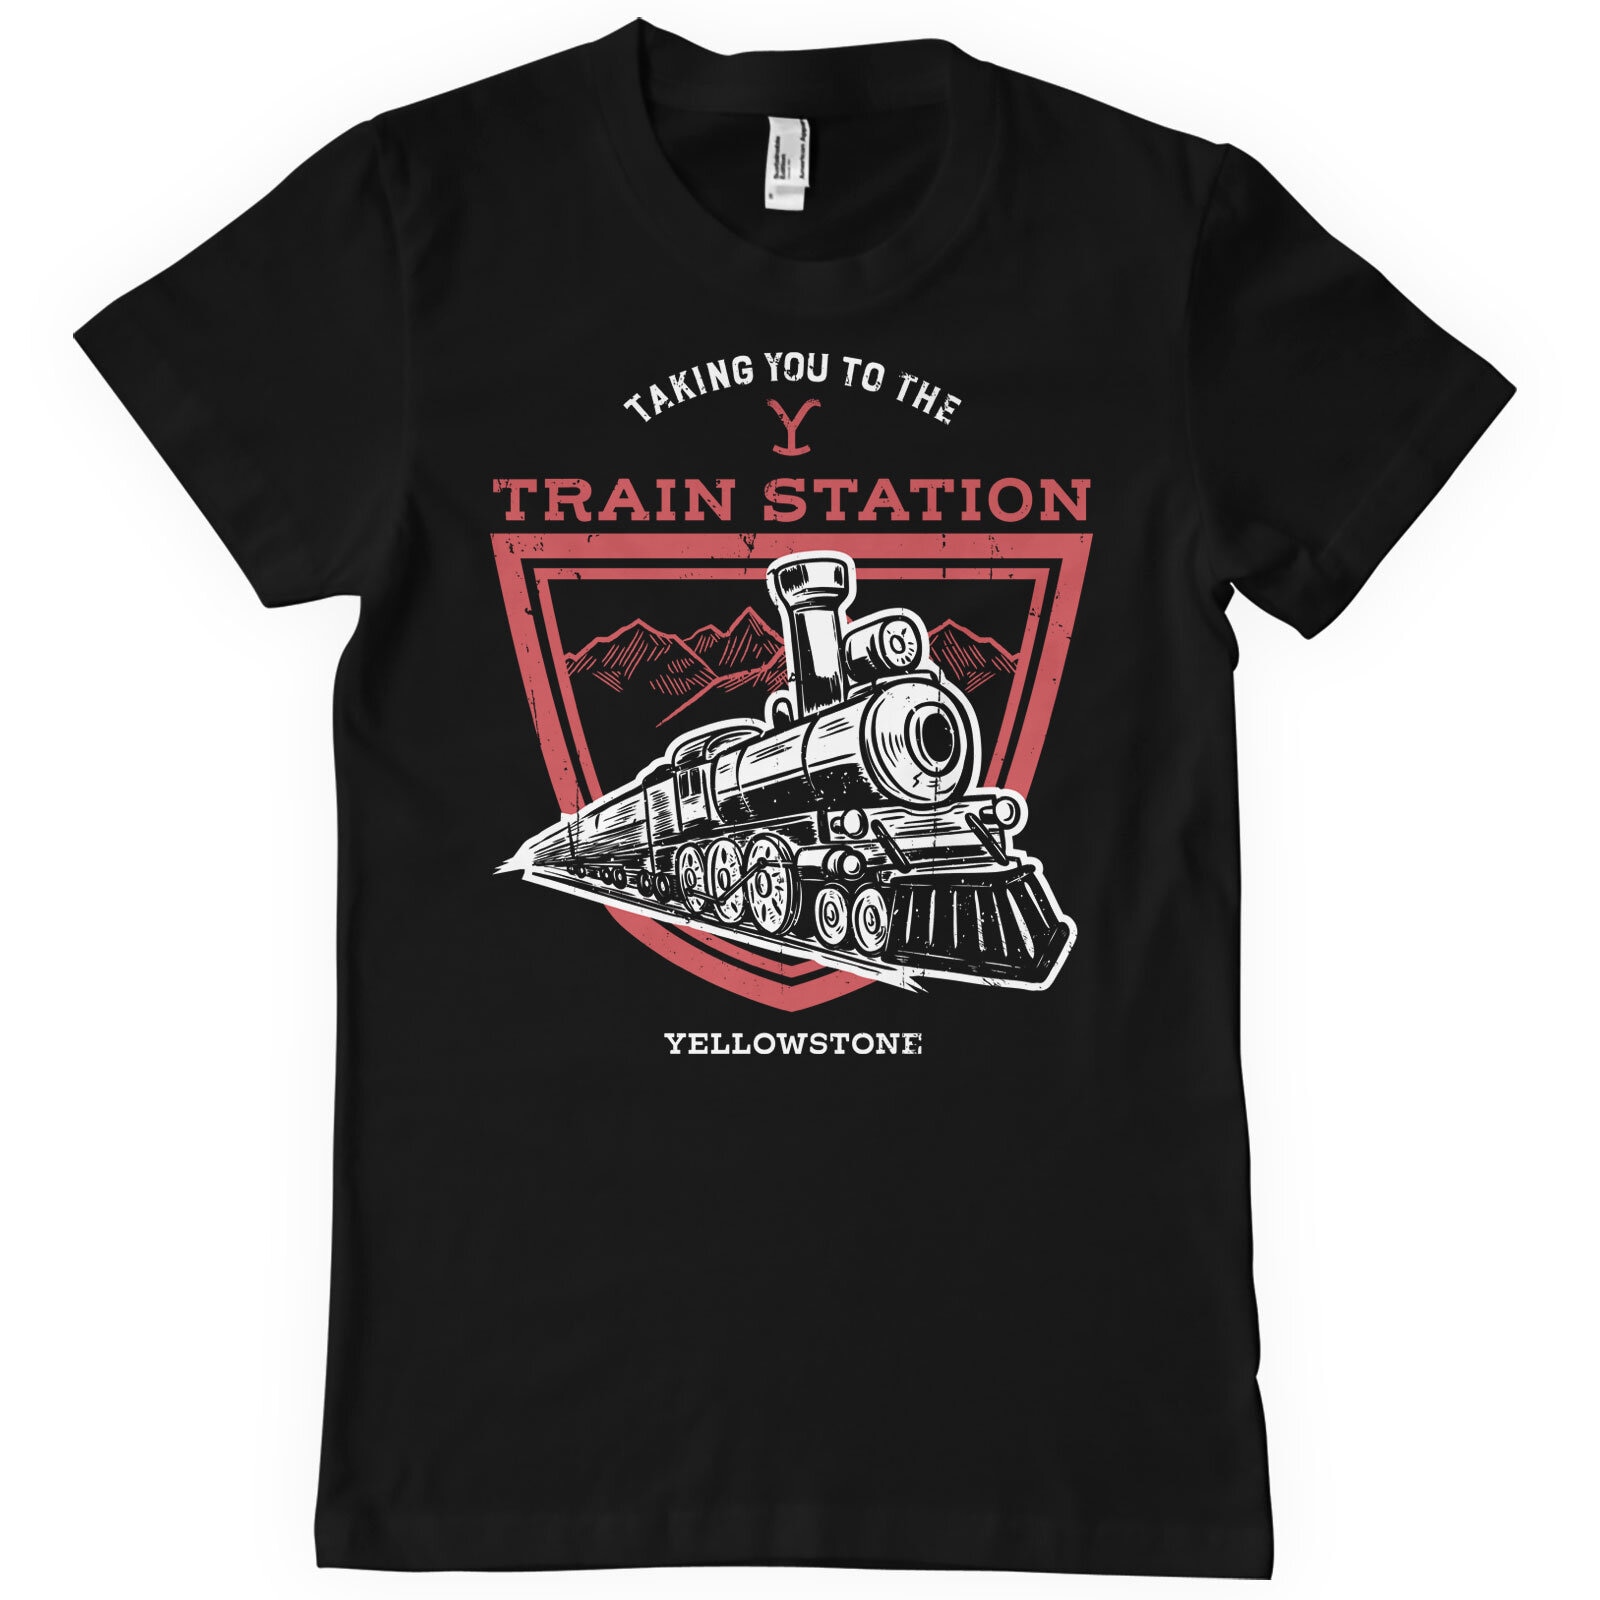 Taking You To The Train Station T-Shirt